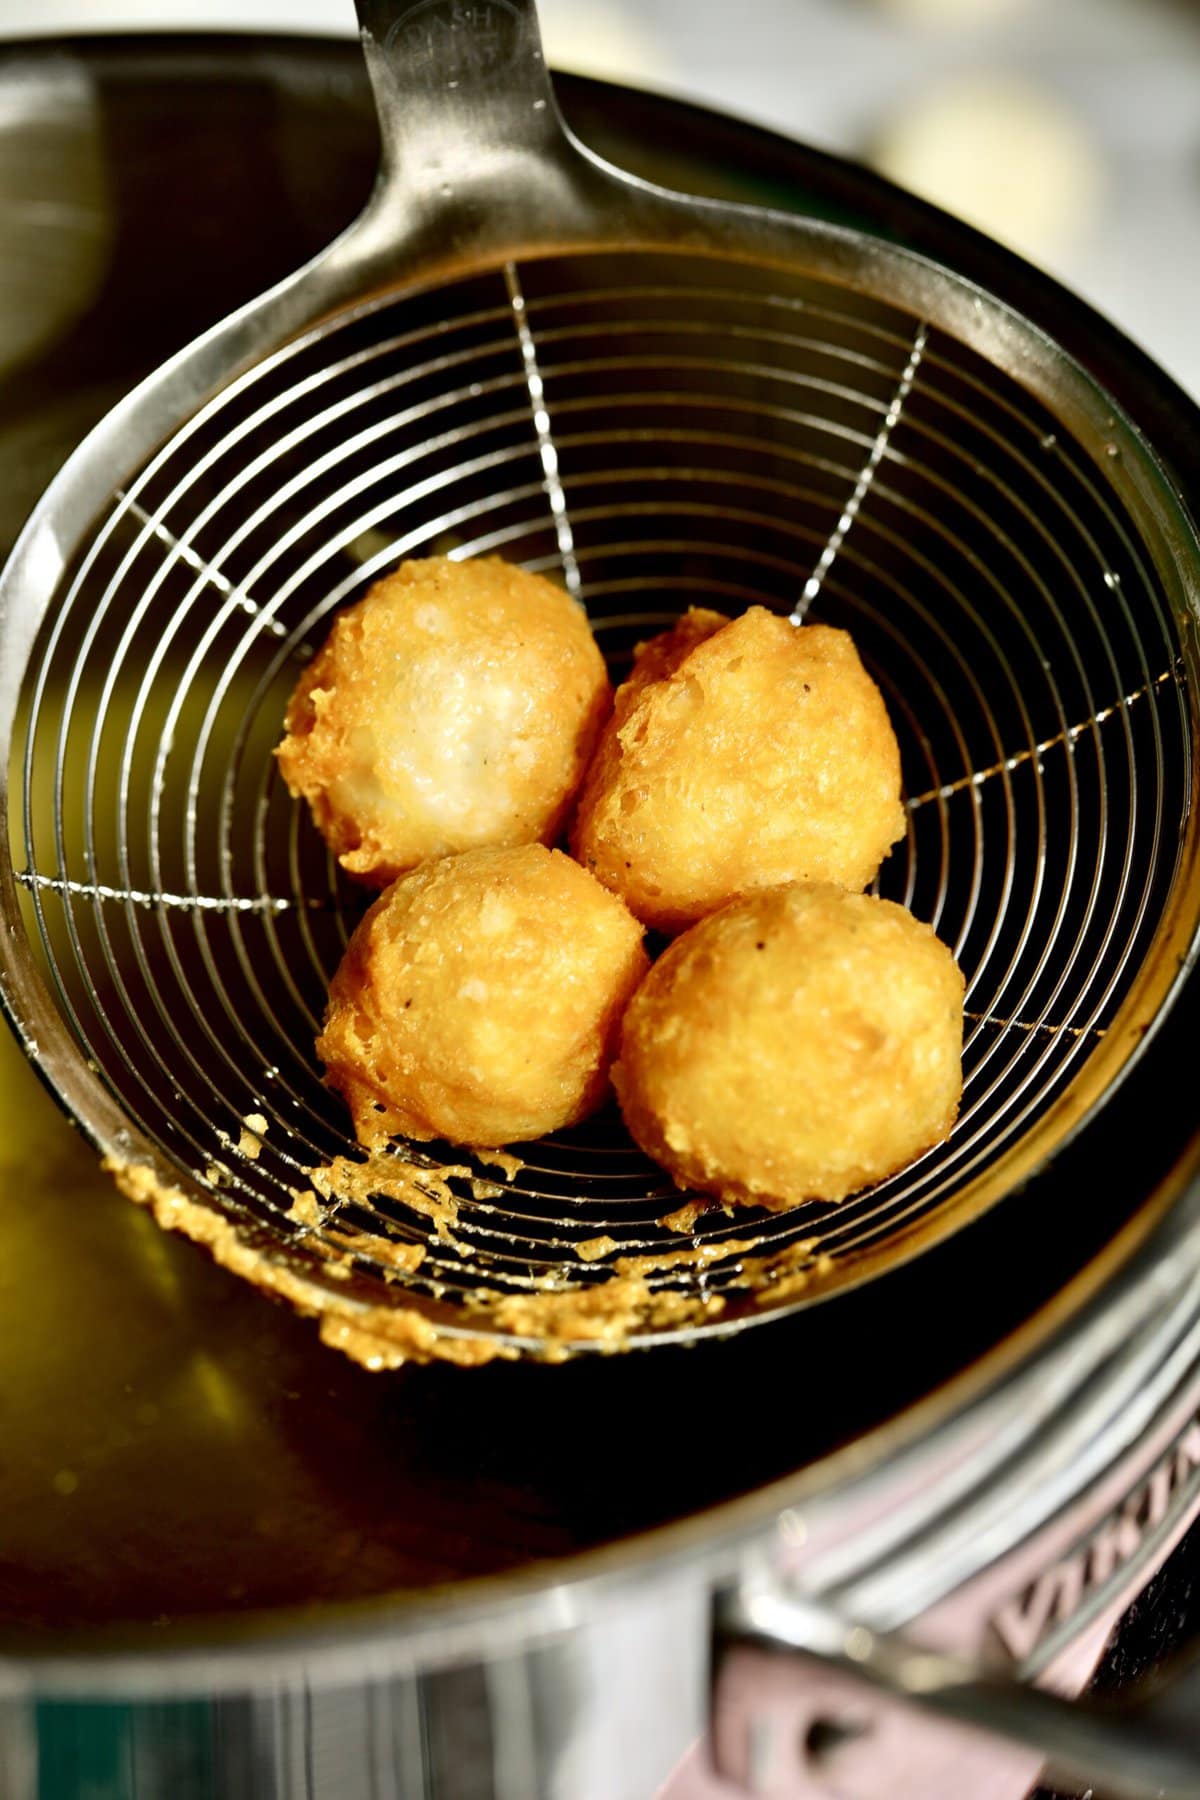 Process for making fried cheese balls- taking the cheese balls out of the fryer with slotted spoon.